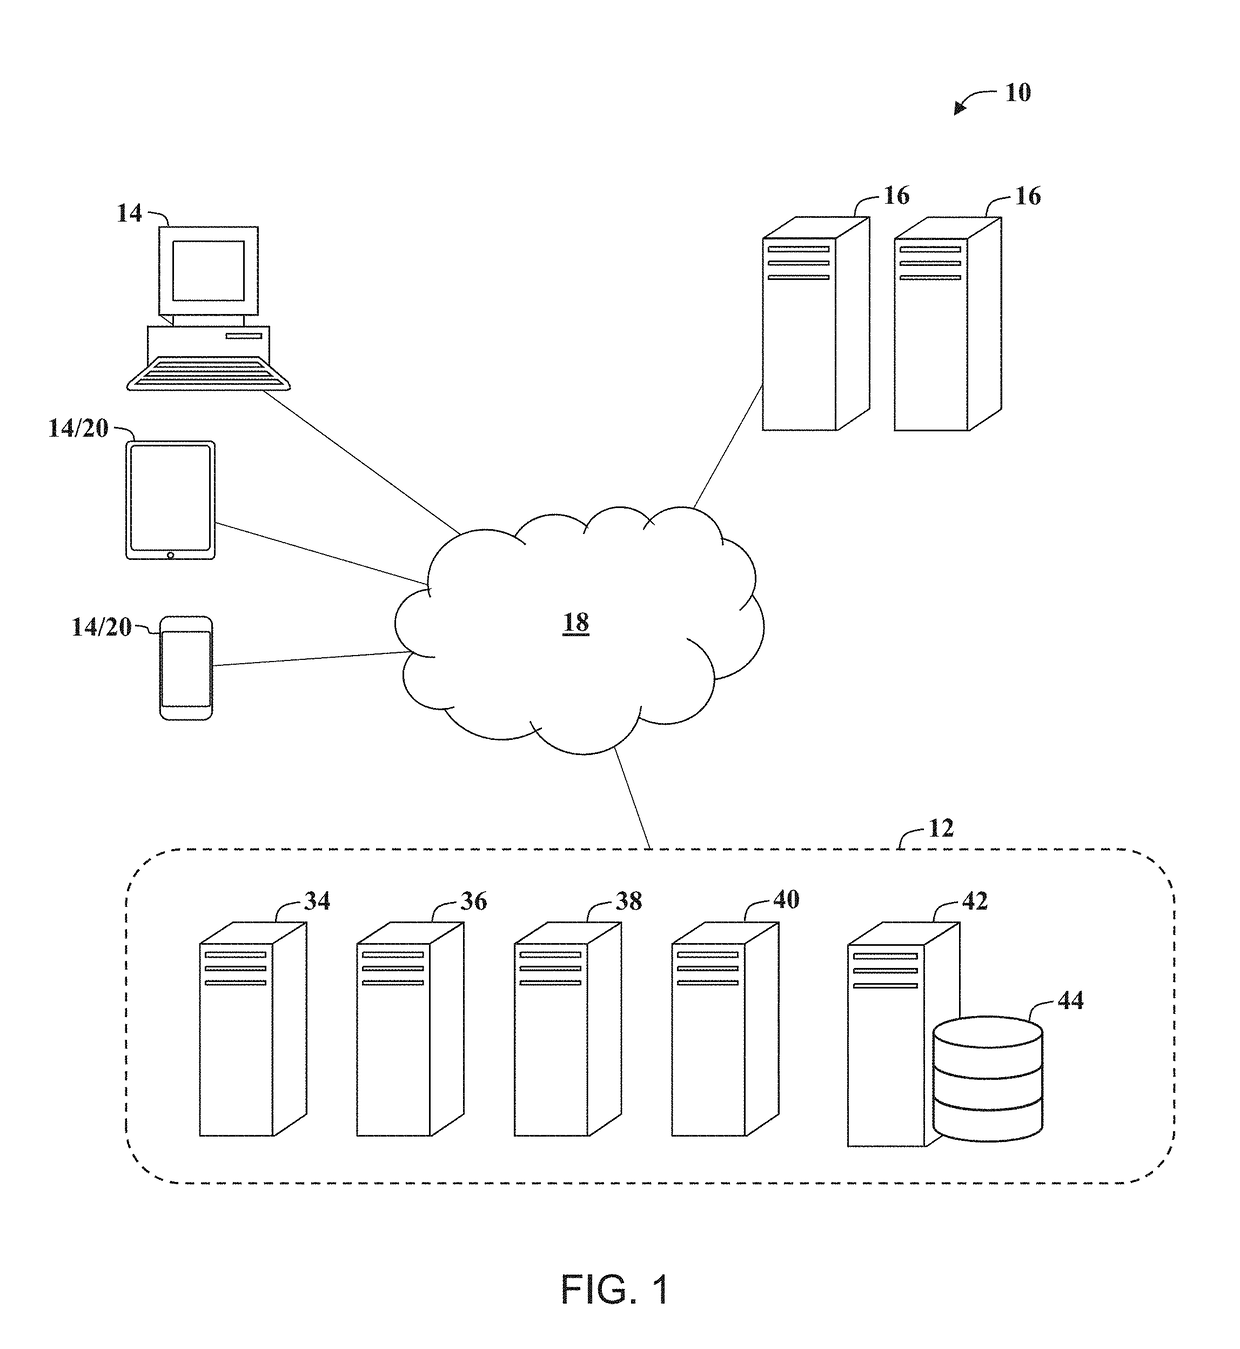 System, method, and non-transitory computer-readable storage media for displaying information on mobile devices